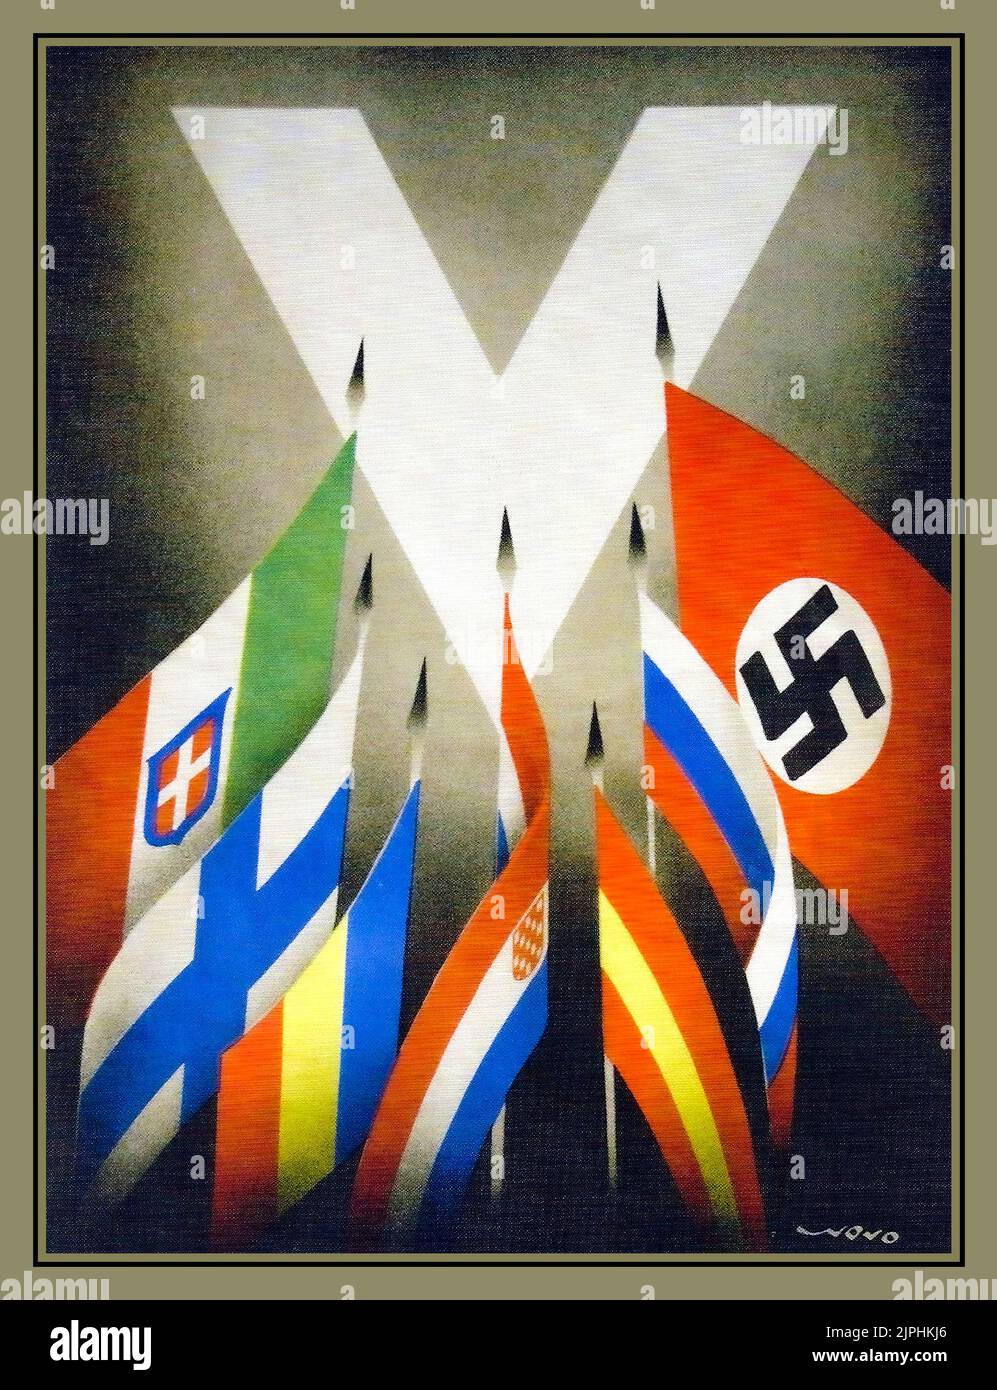 1930s Axis Flags Poster with Nazi Germany Swastika Flag featured, with 'V' for Victory superimposed for political propaganda purposes WW2 World War II Second World War Stock Photo